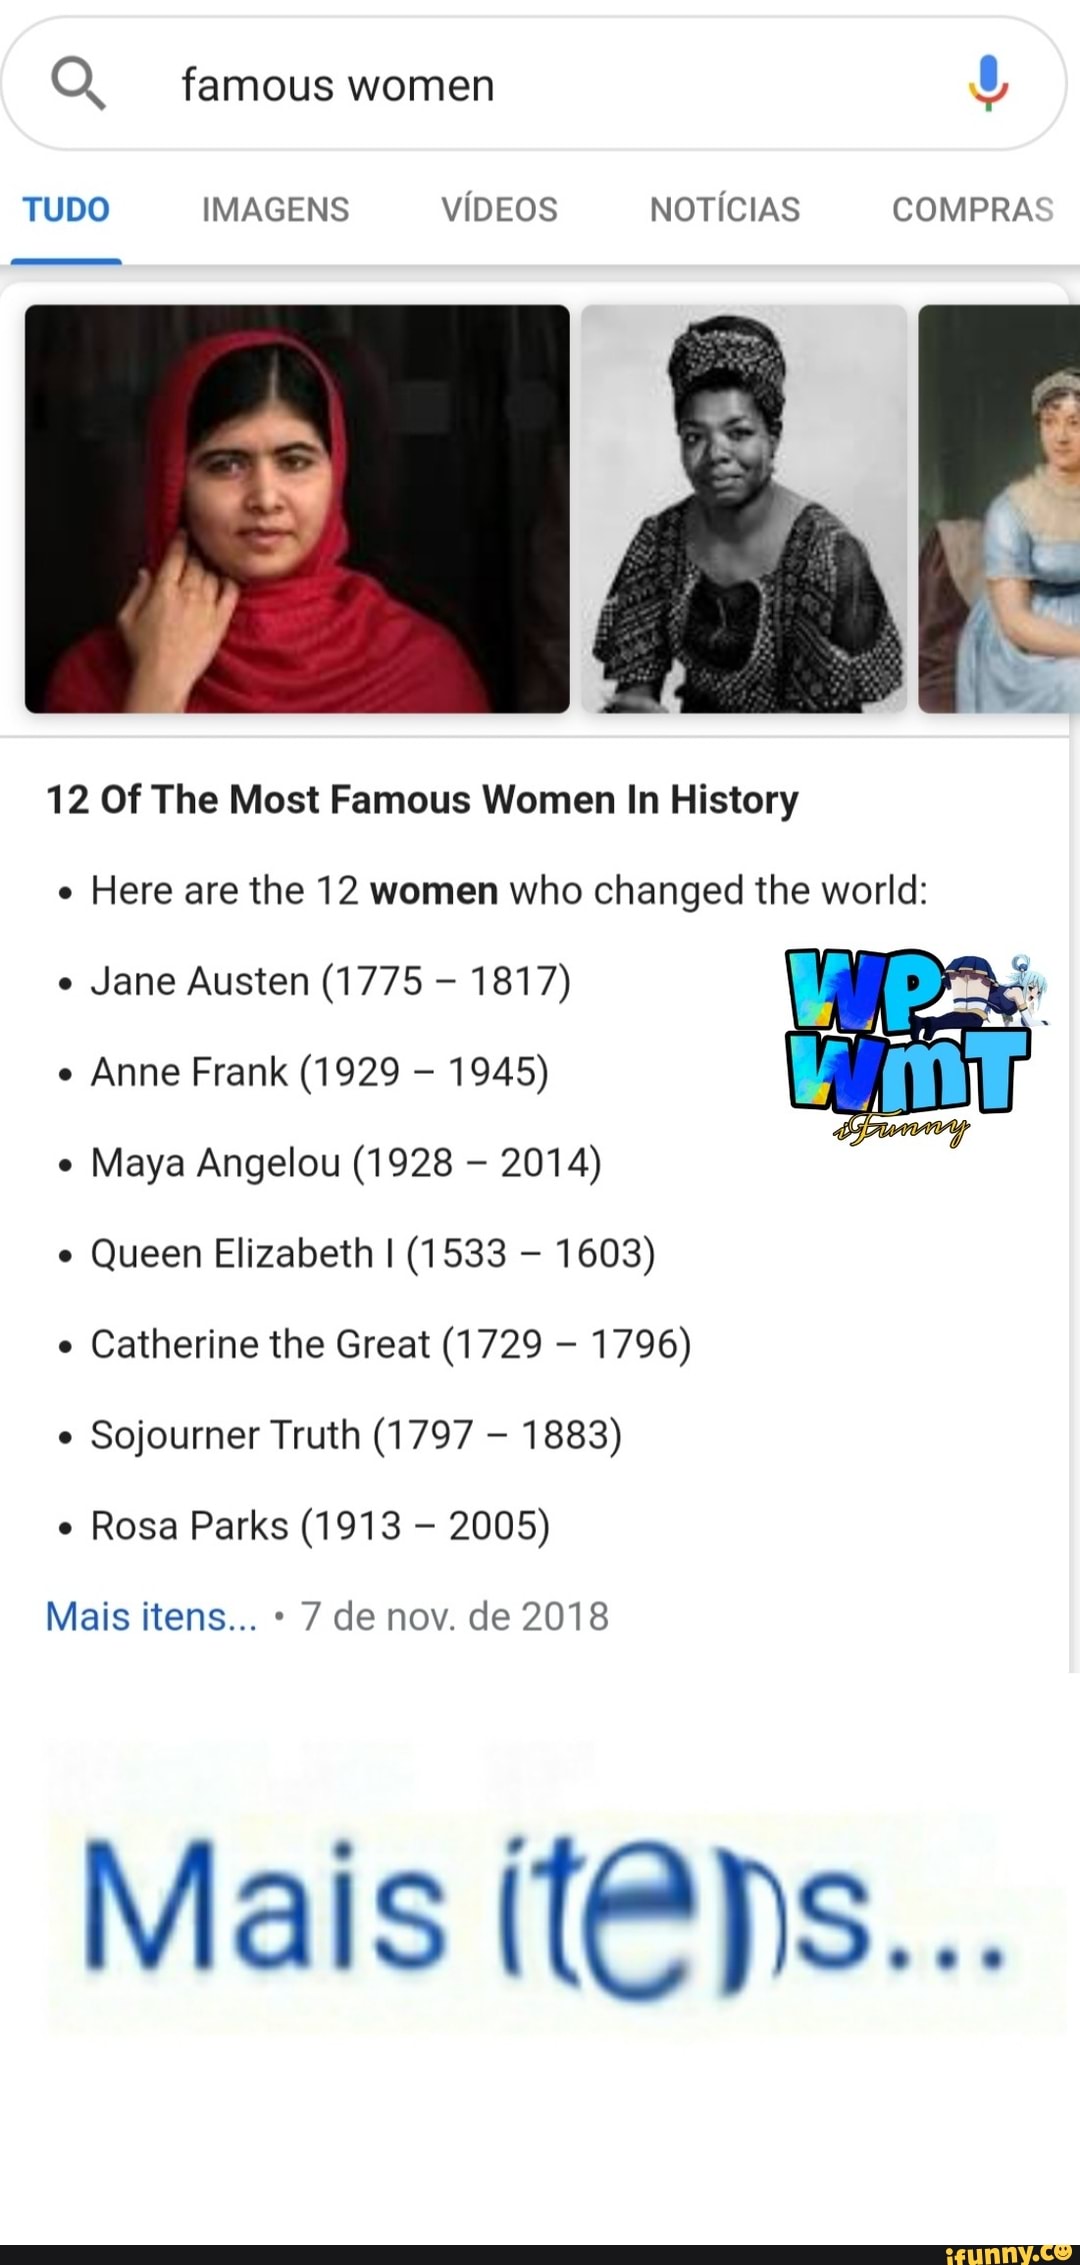 Who Are The Famous Women From History Who Changed The World?